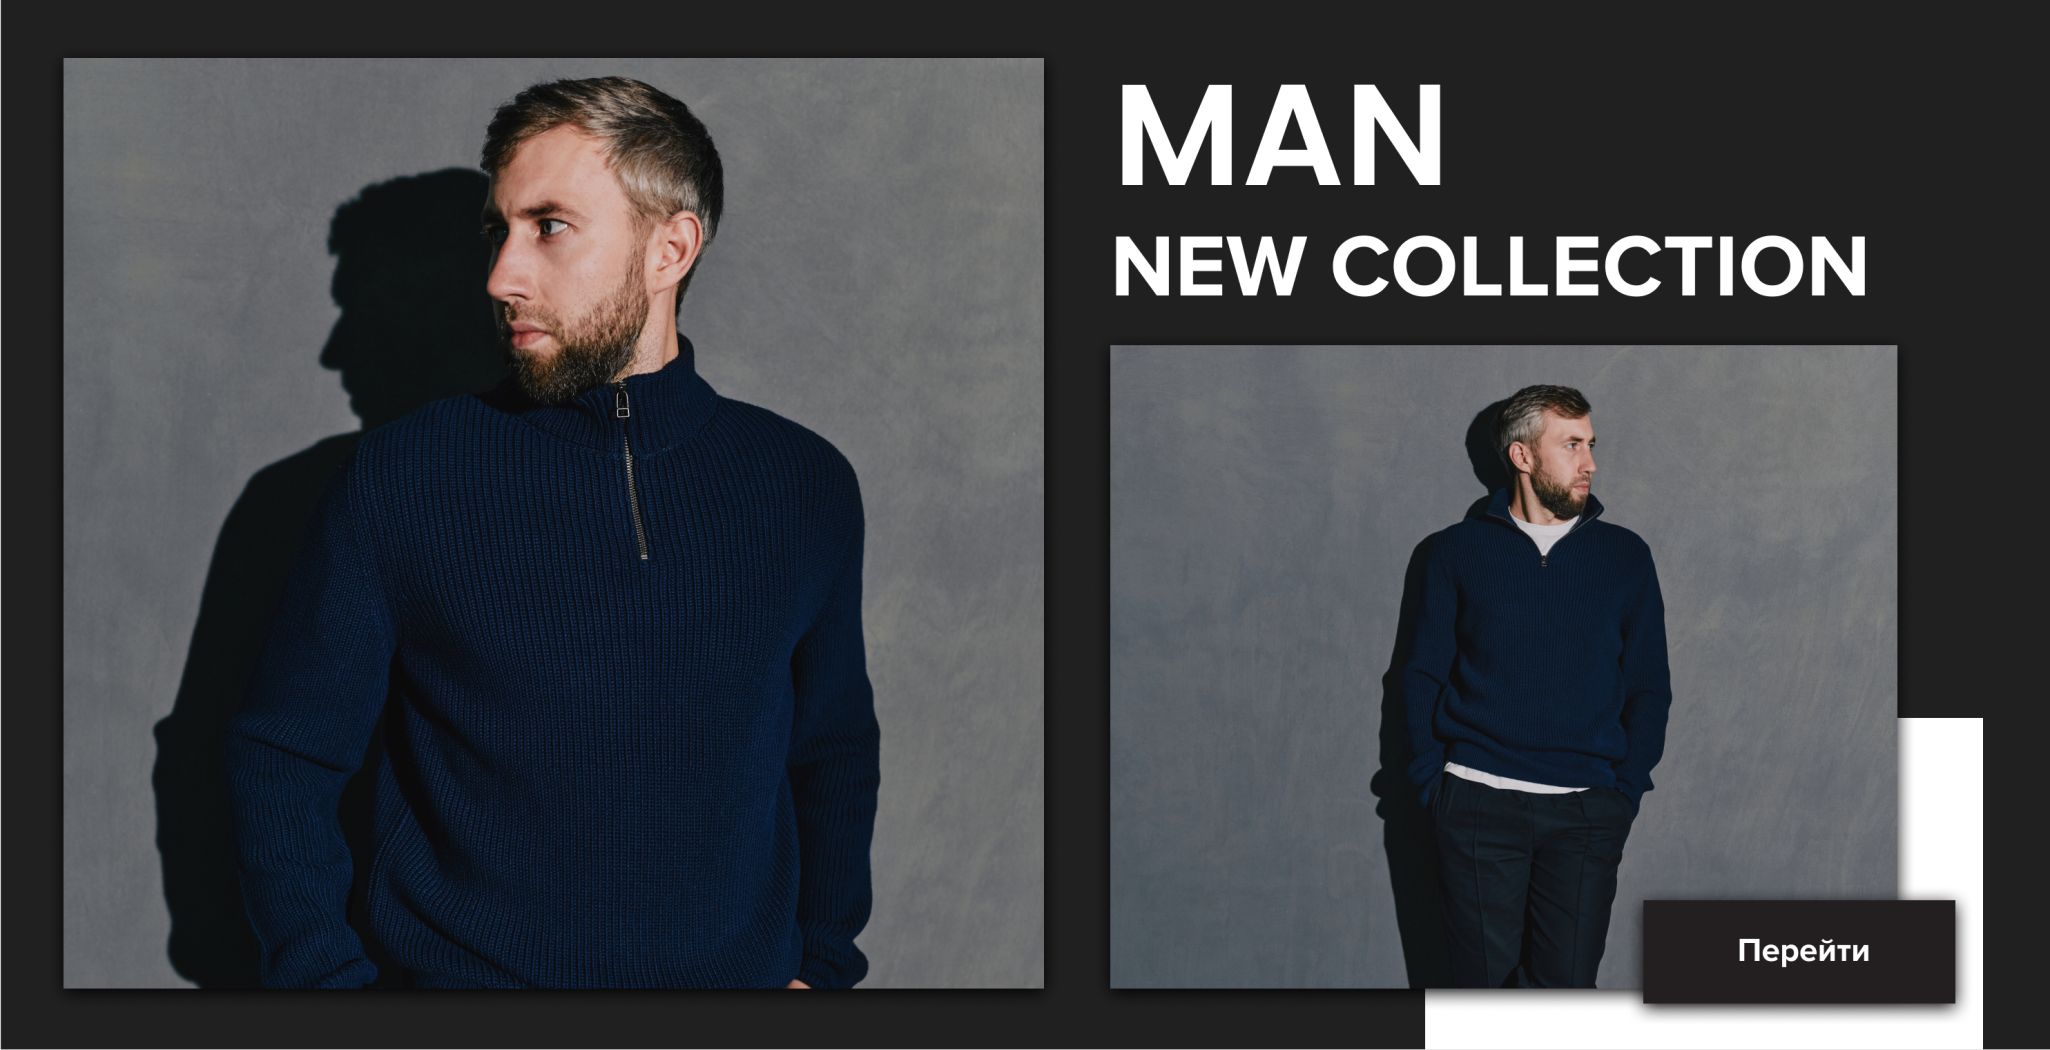 NEW COLLECTION FOR MEN